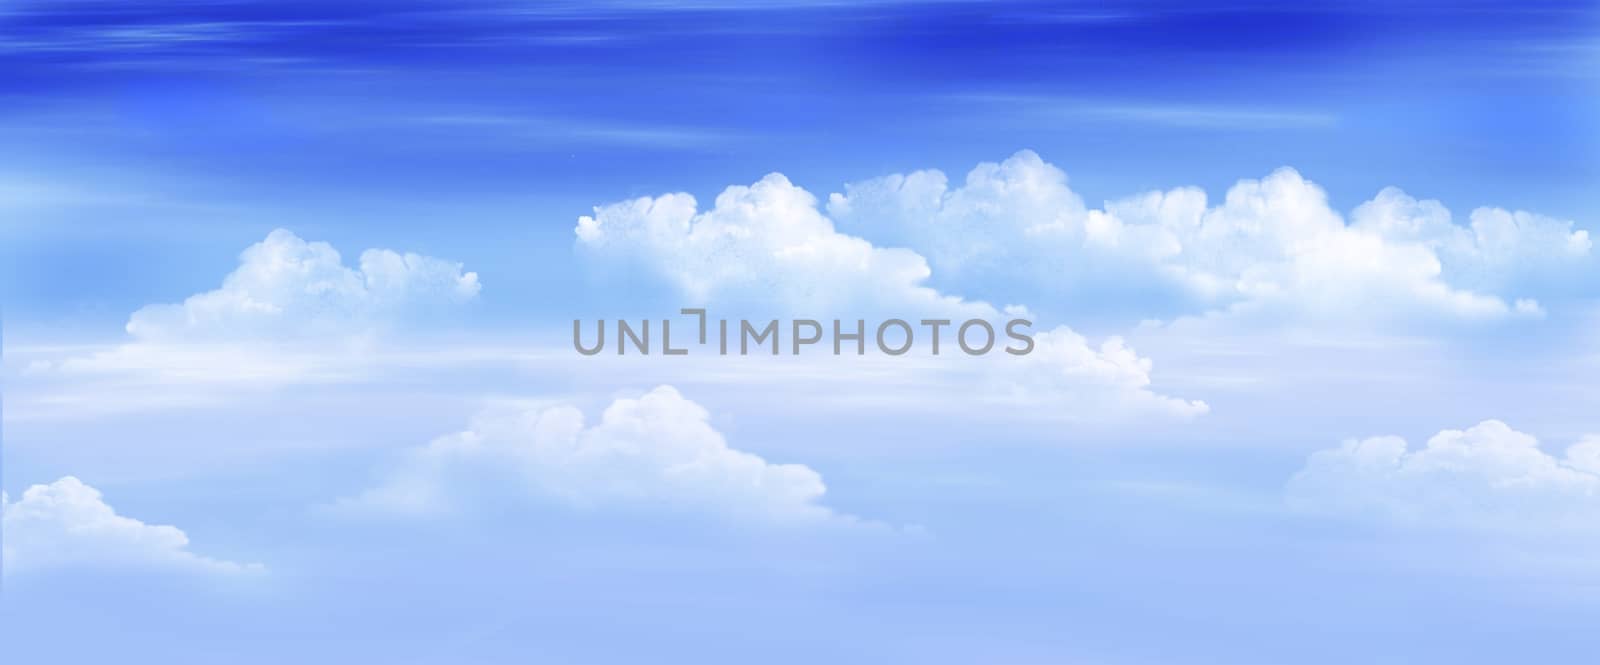 Digital painting of the White Clouds in a Blue Sky. Panorama